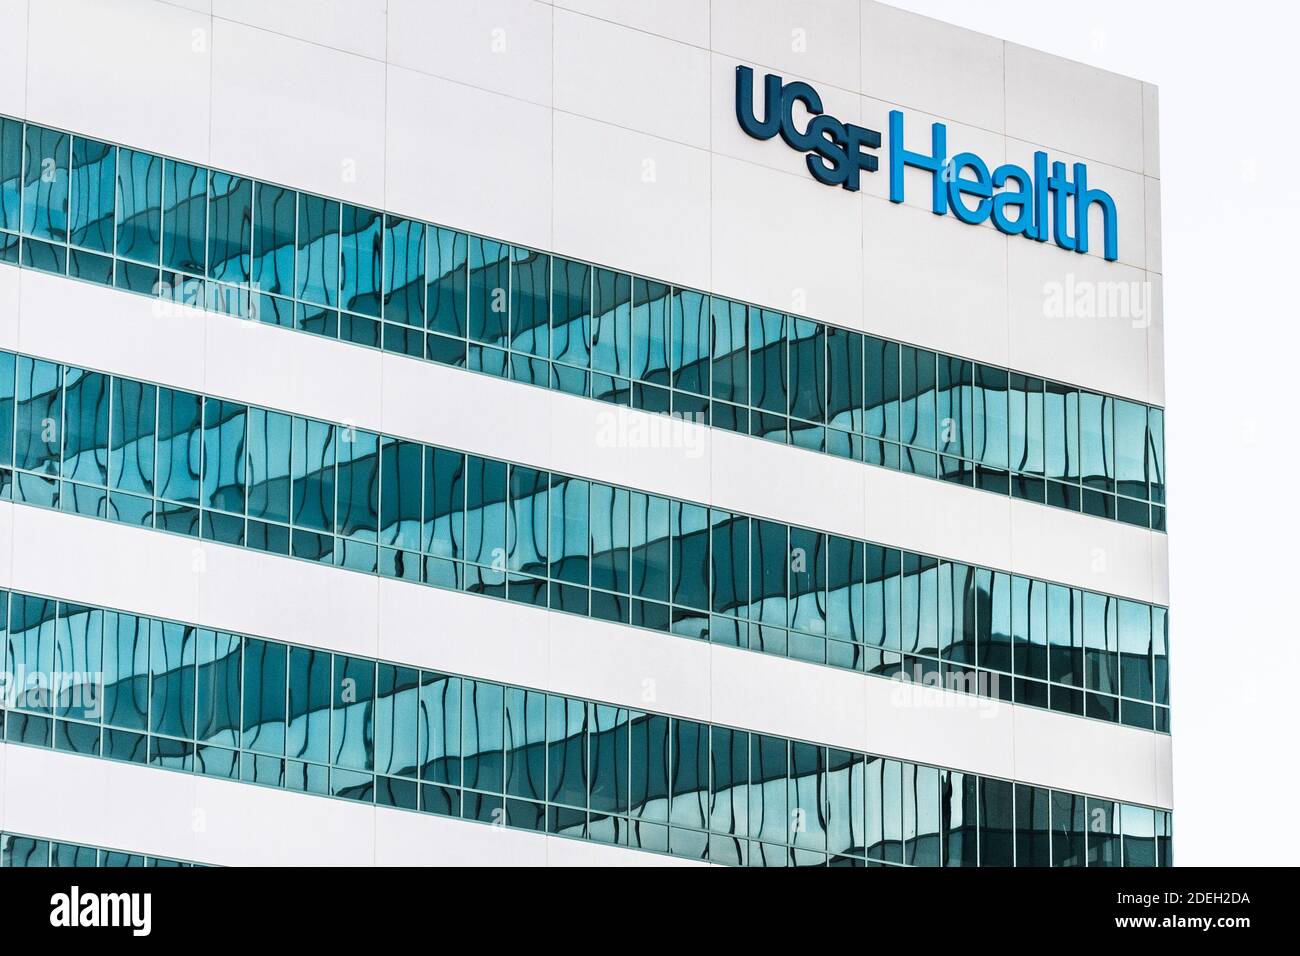 Sep 21, 2020 Brisbane / CA / USA - UCSF Health (UCSF Medical Center) location housing the Supply Chain Management Department; UCSF Medical Center is a Stock Photo